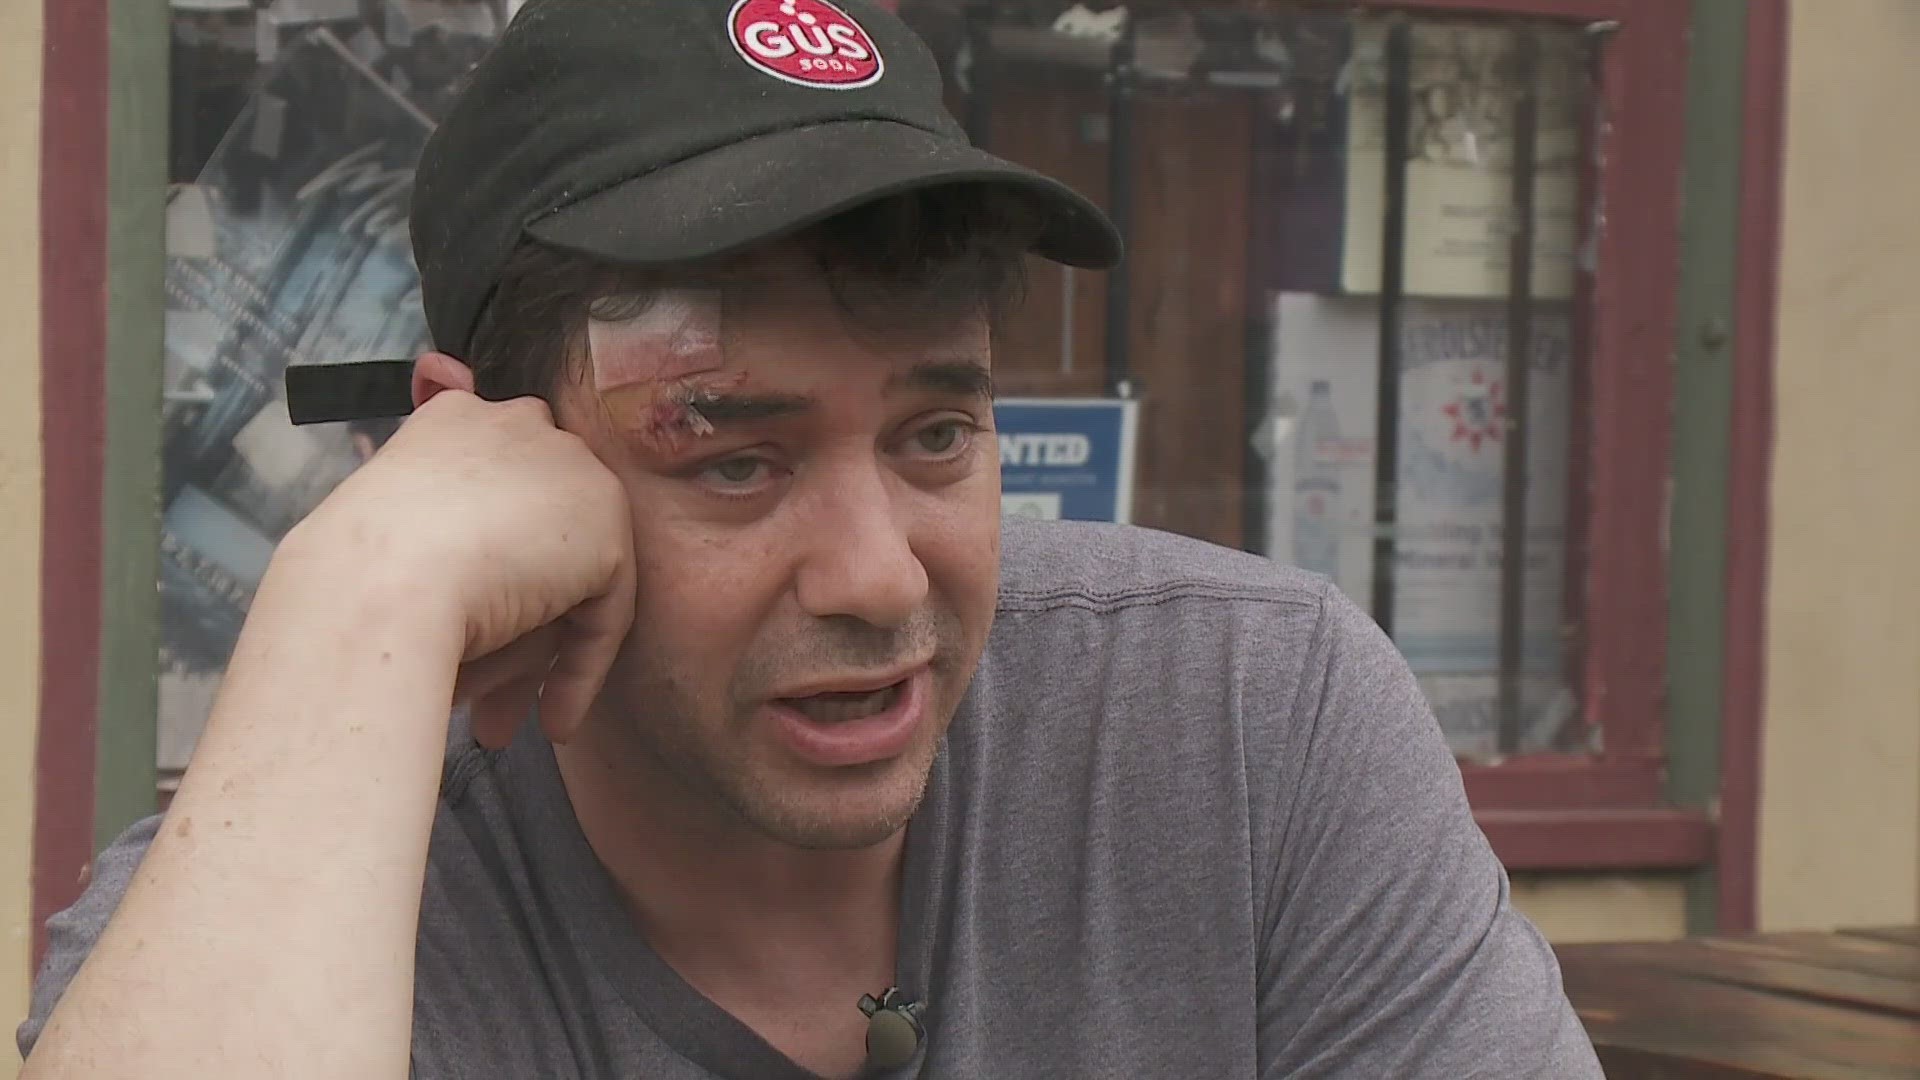 Popular deli owner beaten, carjacked in front of his store Thursday